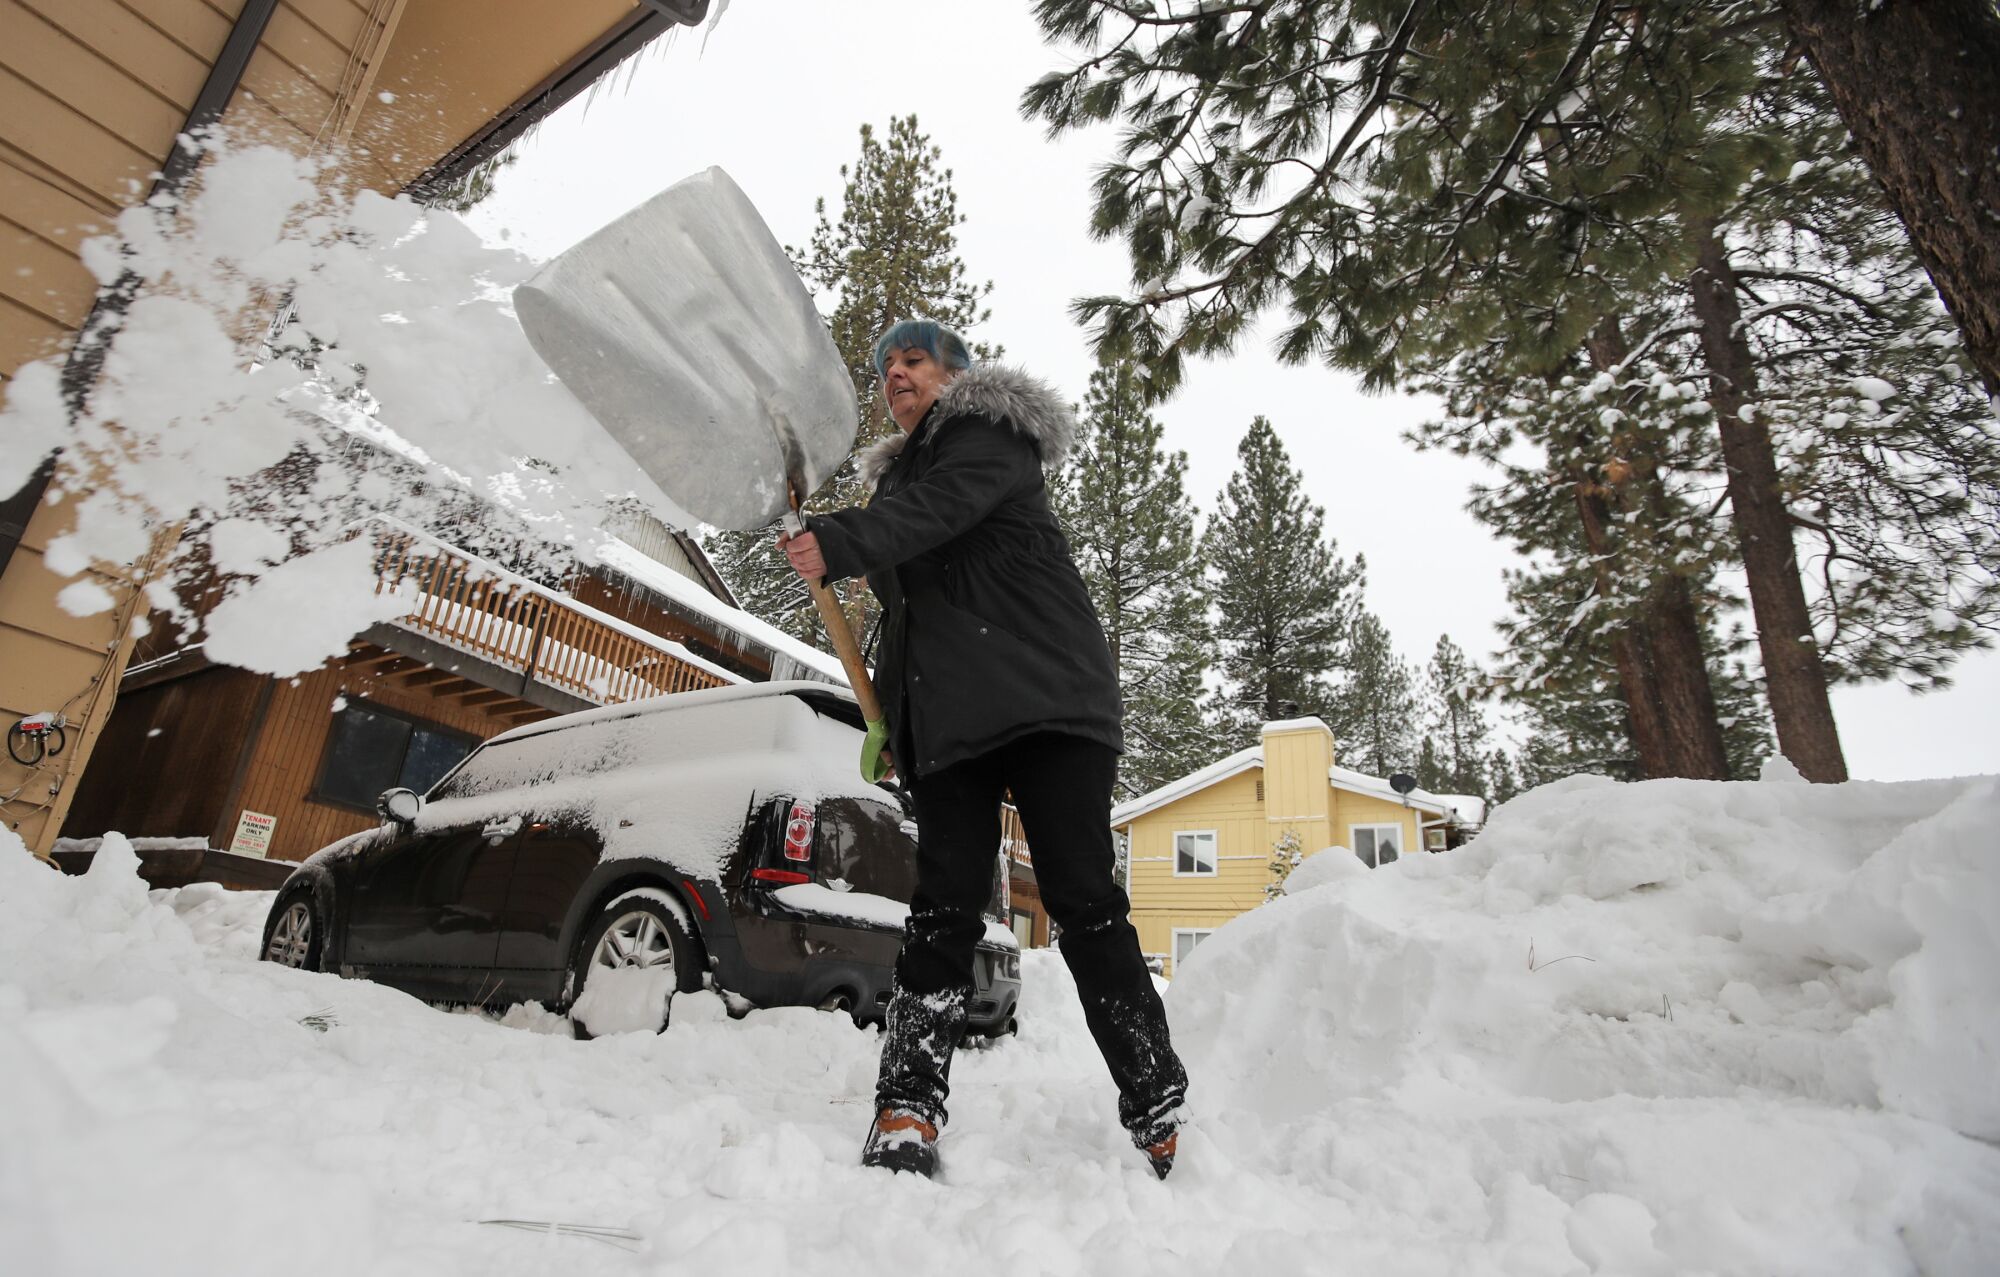 Amblerlee Barden shovels snow from her driveway after successive storms dumped several feet of snow in Big Bear.